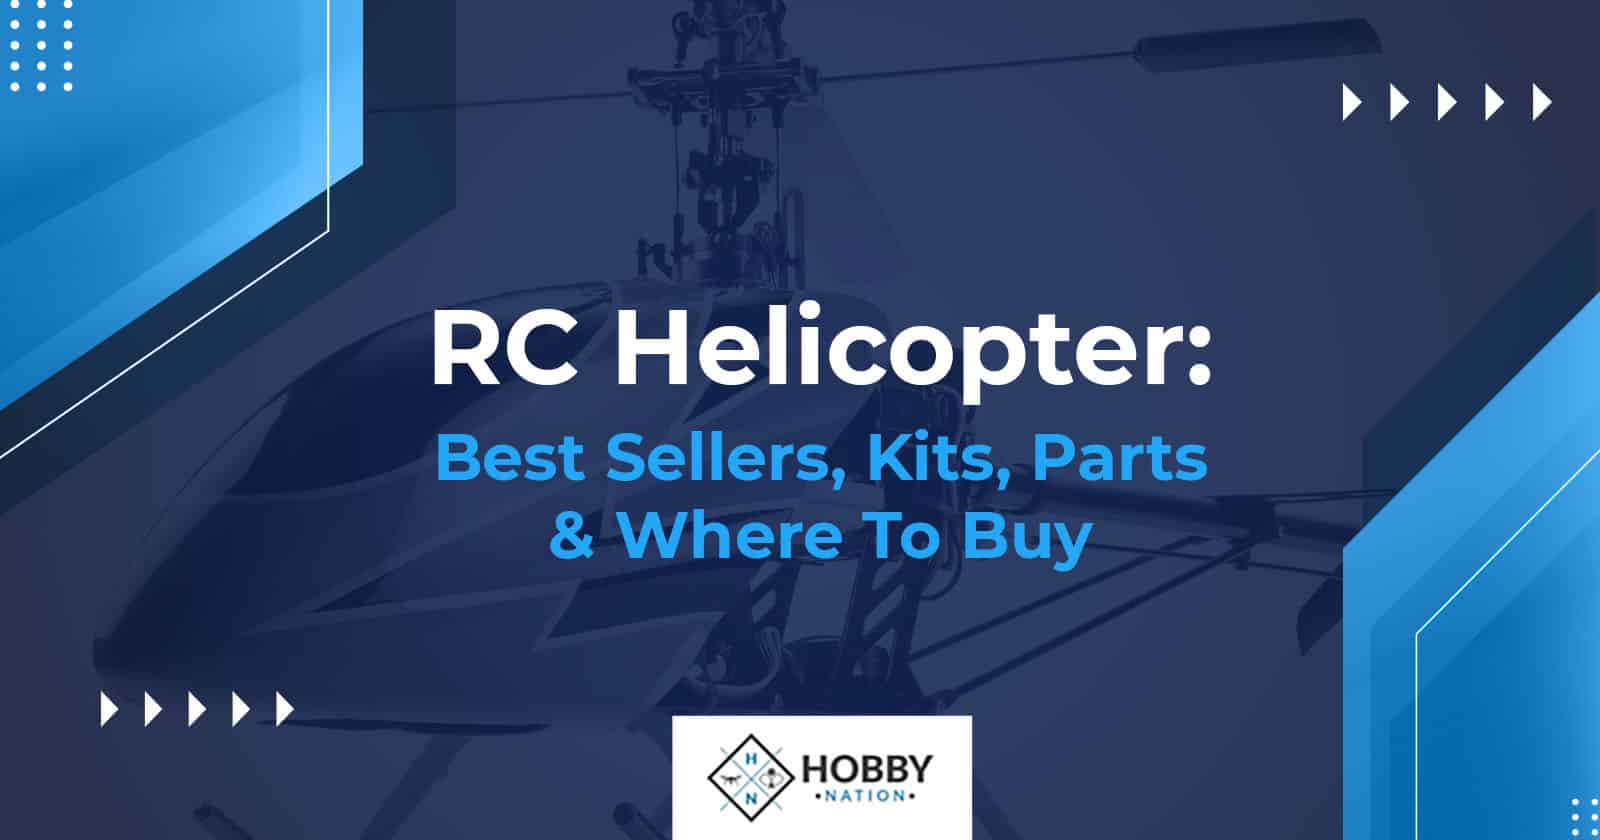 RC Helicopter: Best Sellers, Kits, Parts &#038; Where To Buy